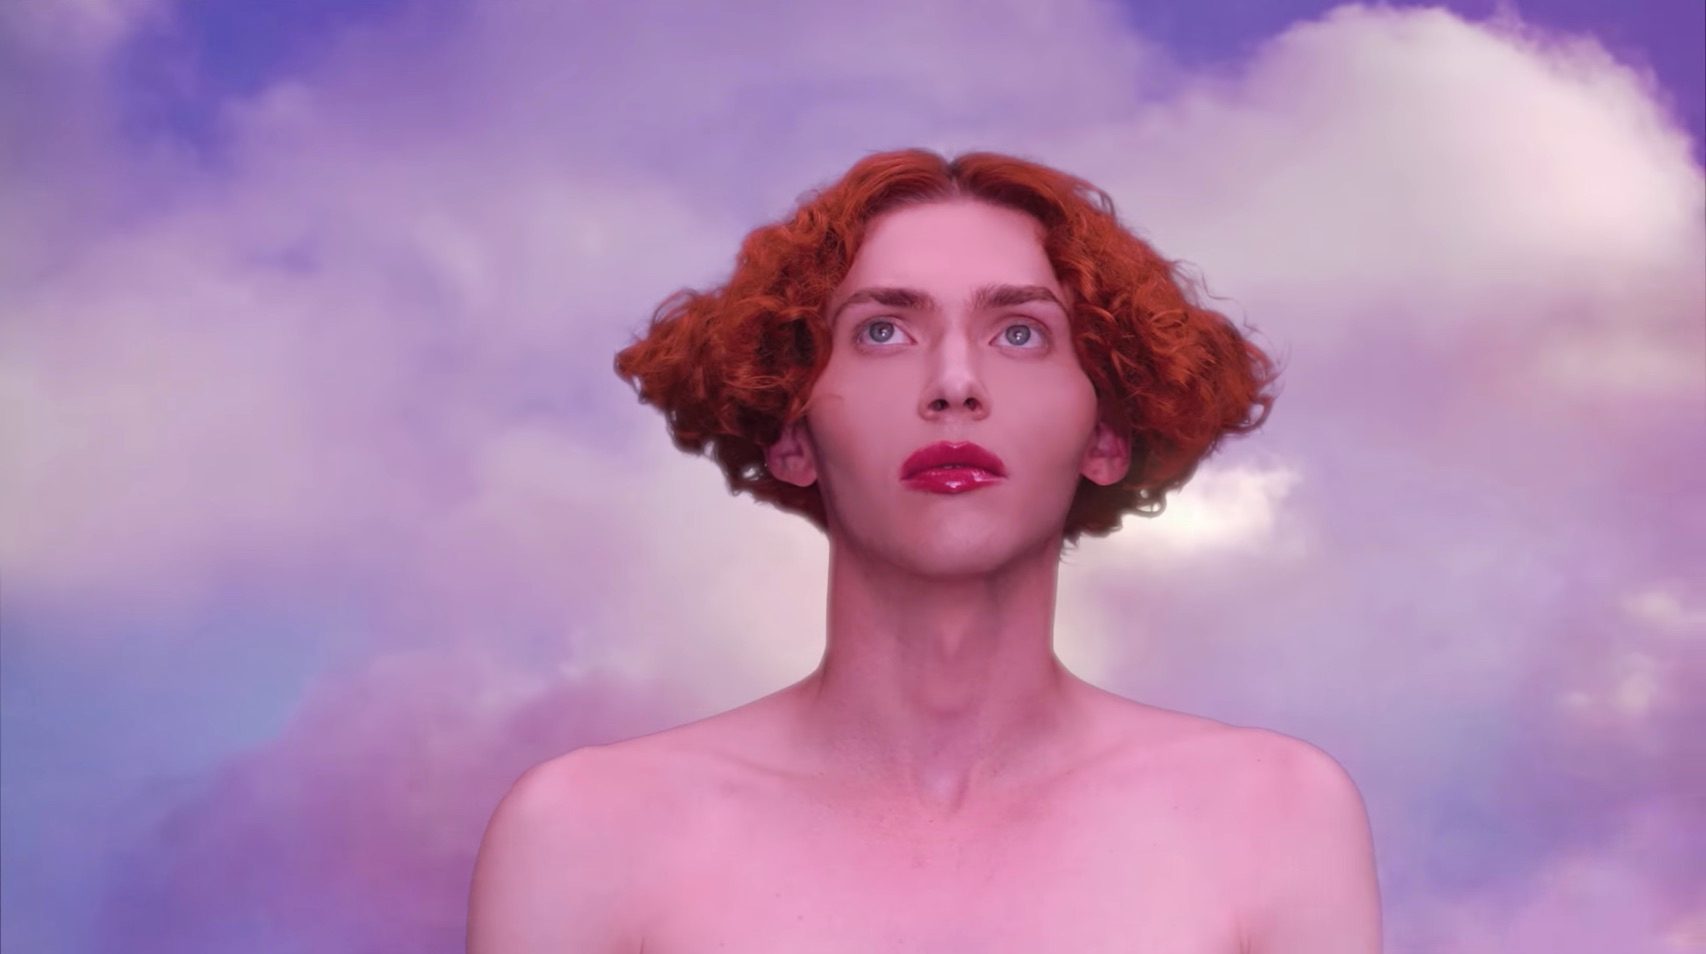 Sophie, Grammy-nominated musician and innovative artist, dies at age 34